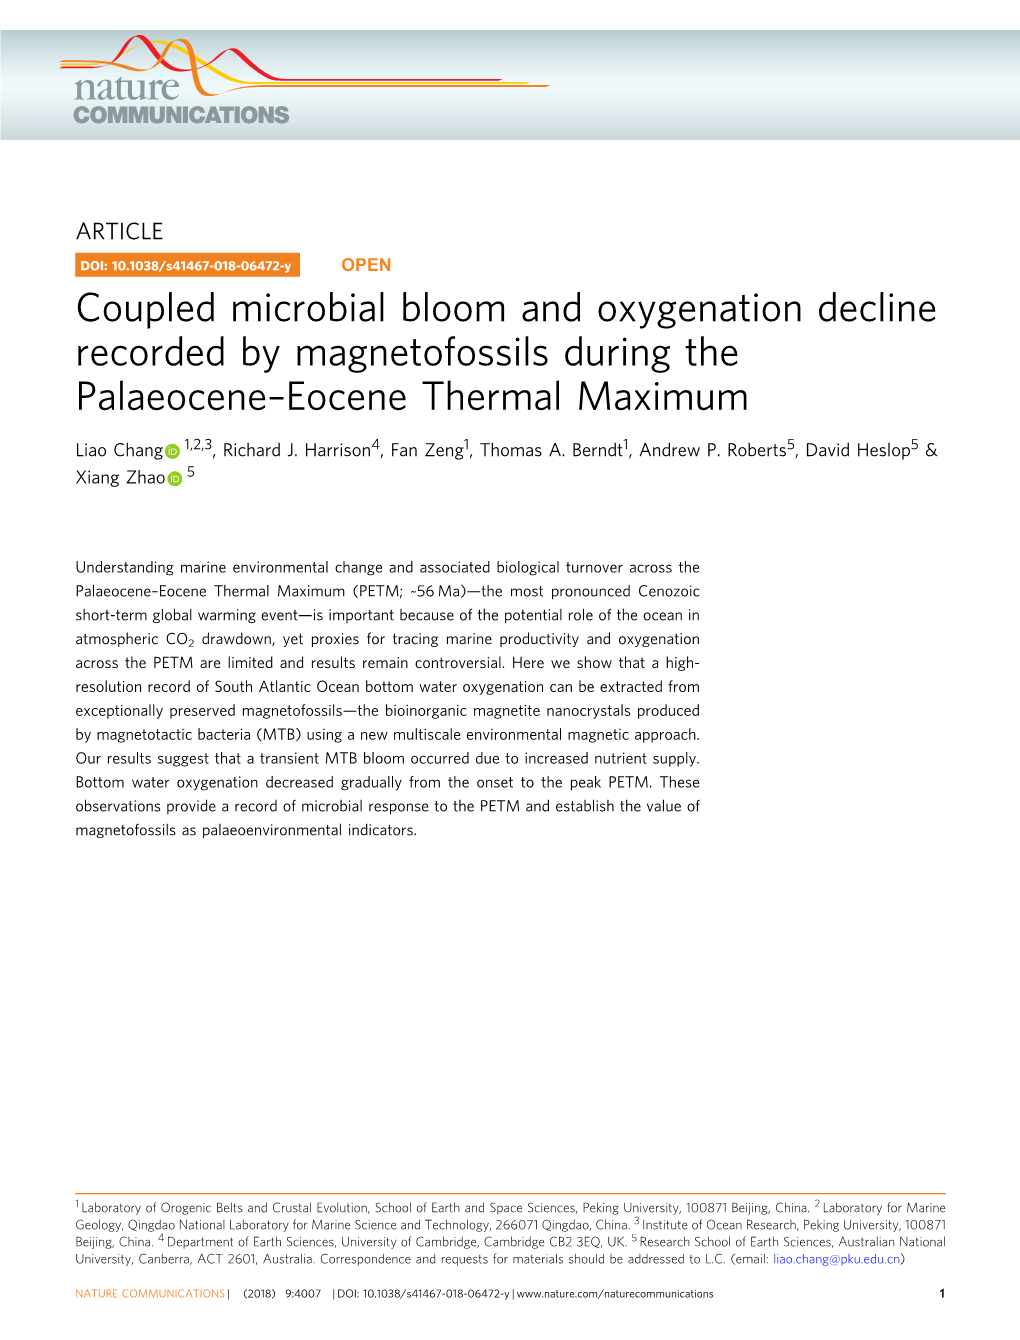 Coupled Microbial Bloom and Oxygenation Decline Recorded by Magnetofossils During the Palaeocene–Eocene Thermal Maximum